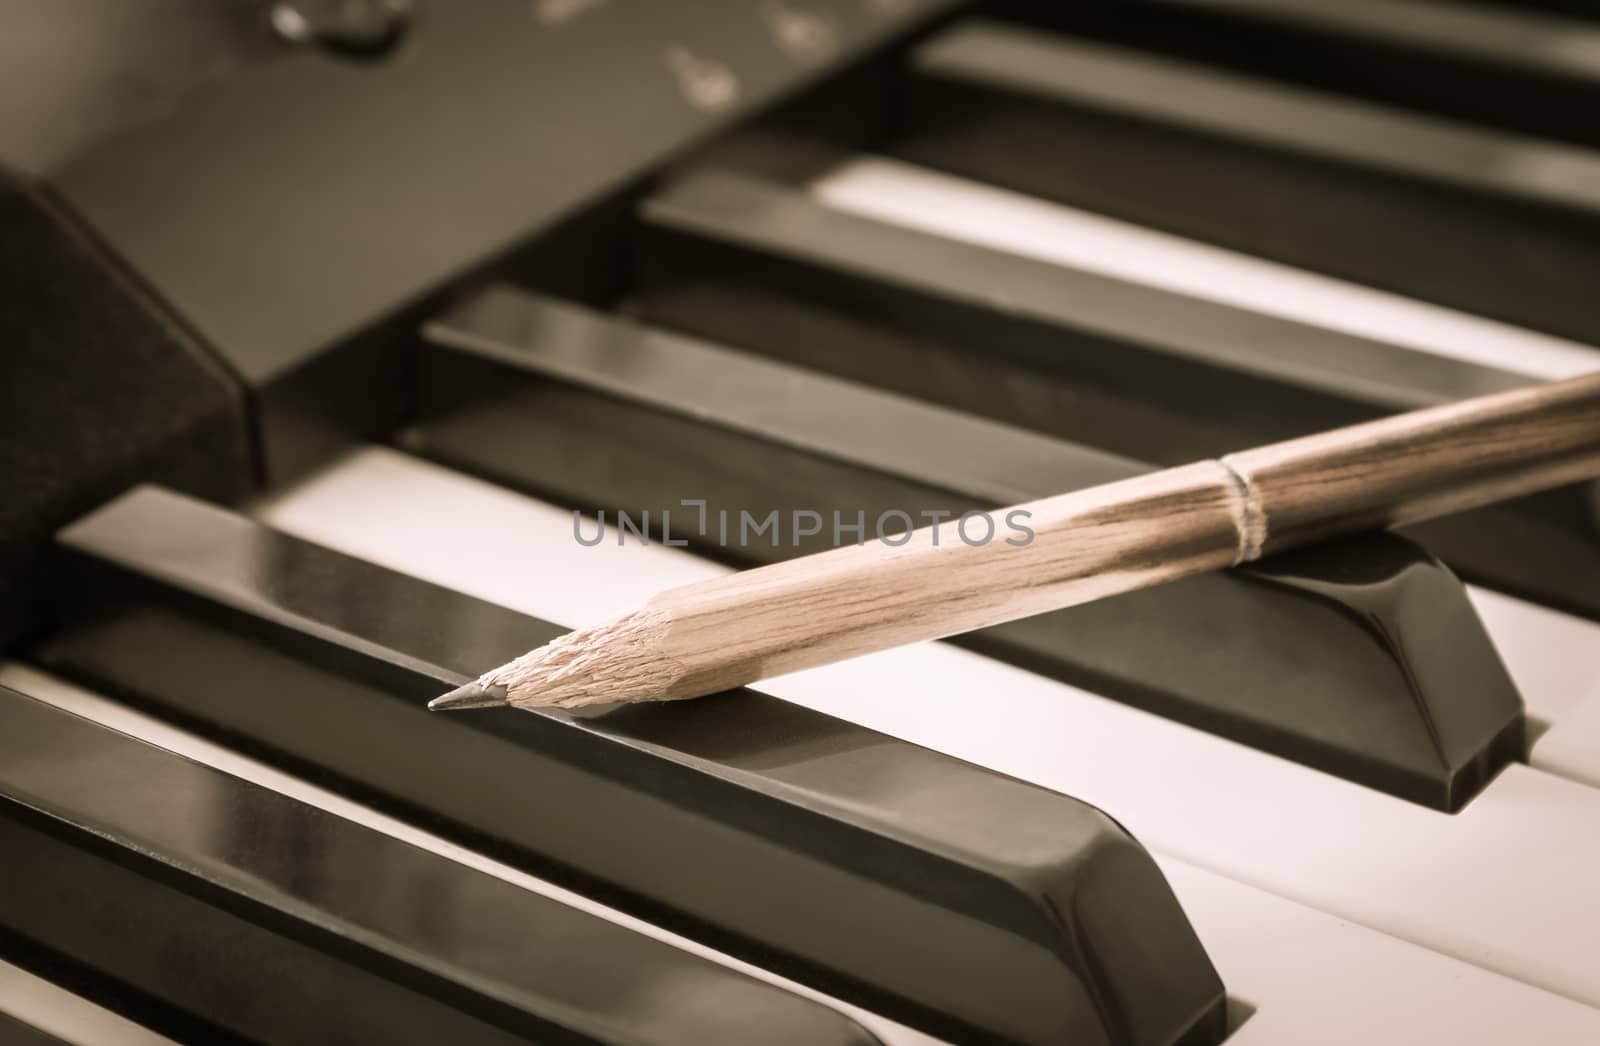 Old Pencil on Black Keys of Electric Piano in Crosswise View. Concept about Piano Playing or Piano Learning